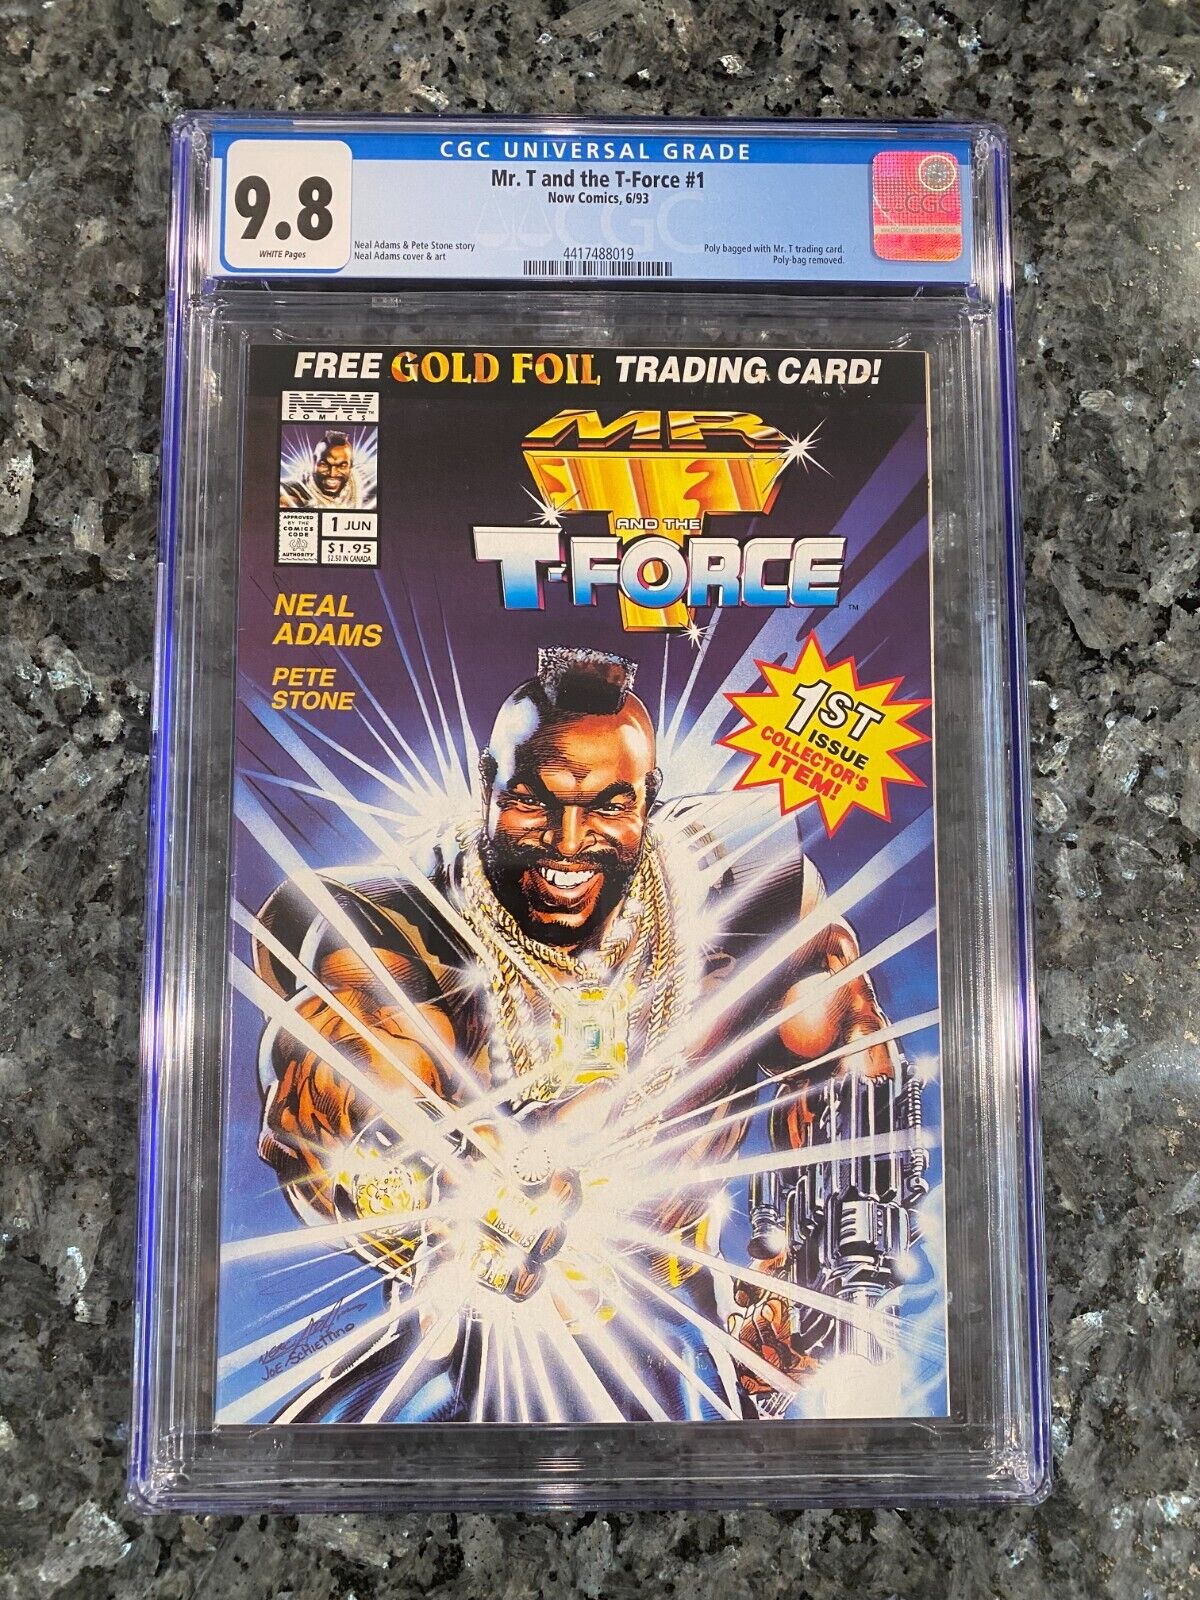 Iconic 1980s Nostalgia: Mr. T and the T-Force #1 - CGC 9.8 - With Trading Card